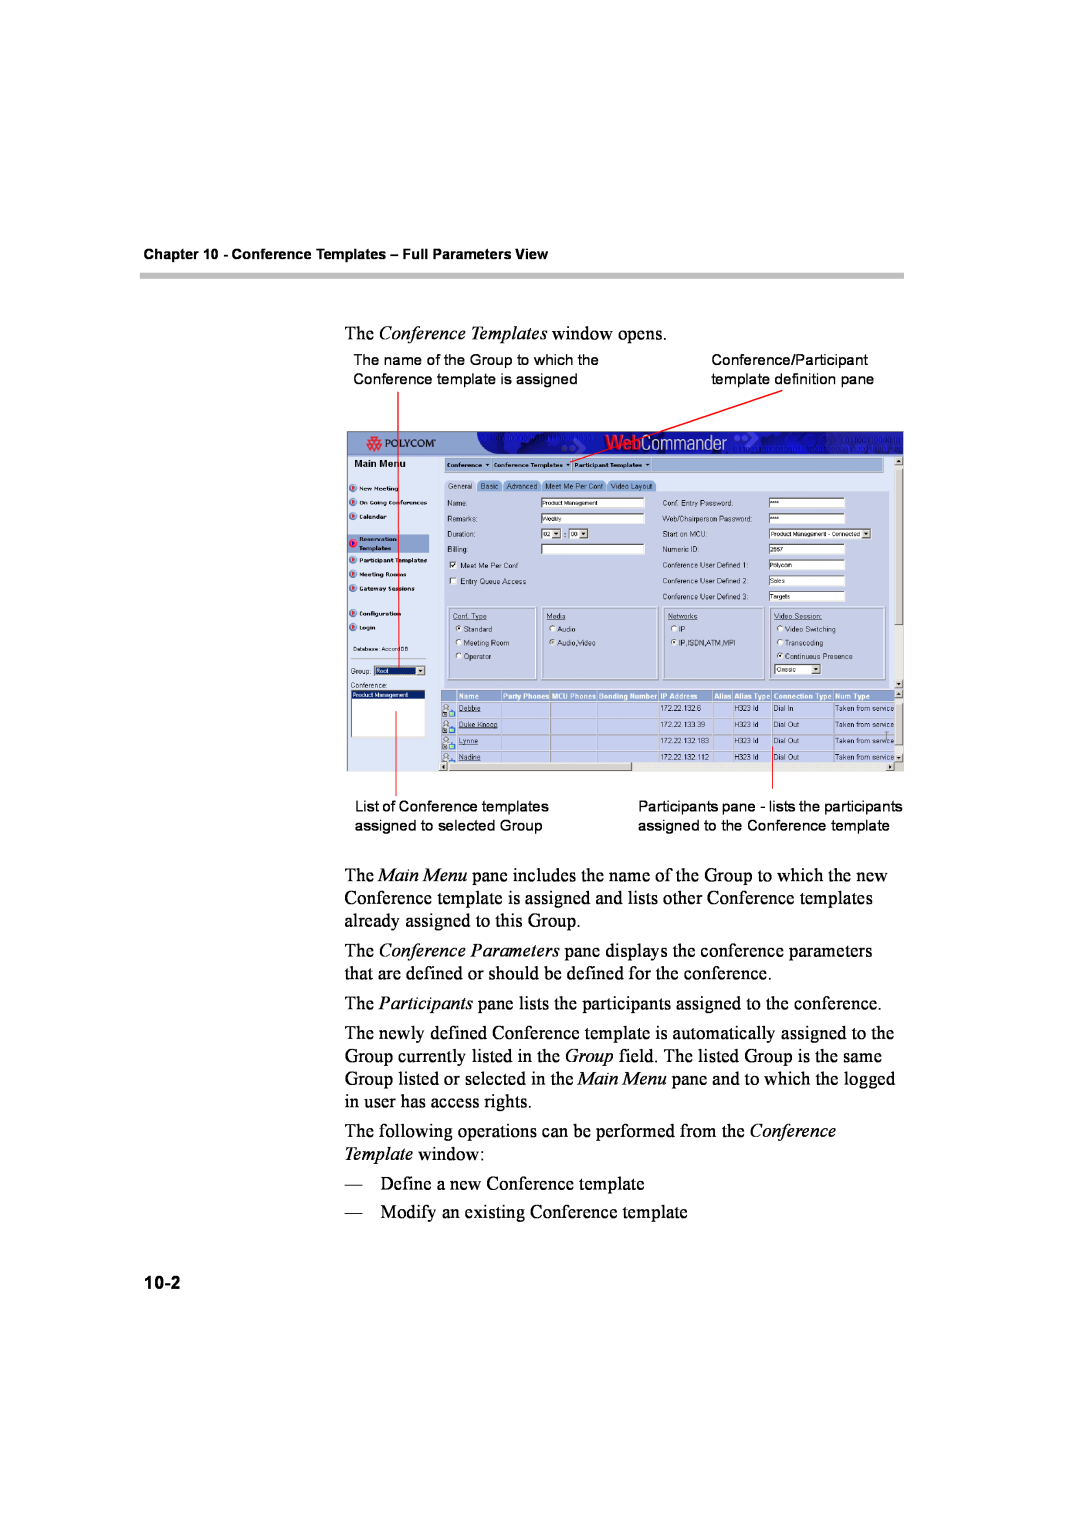 Polycom 8 manual The Conference Templates window opens, Define a new Conference template 